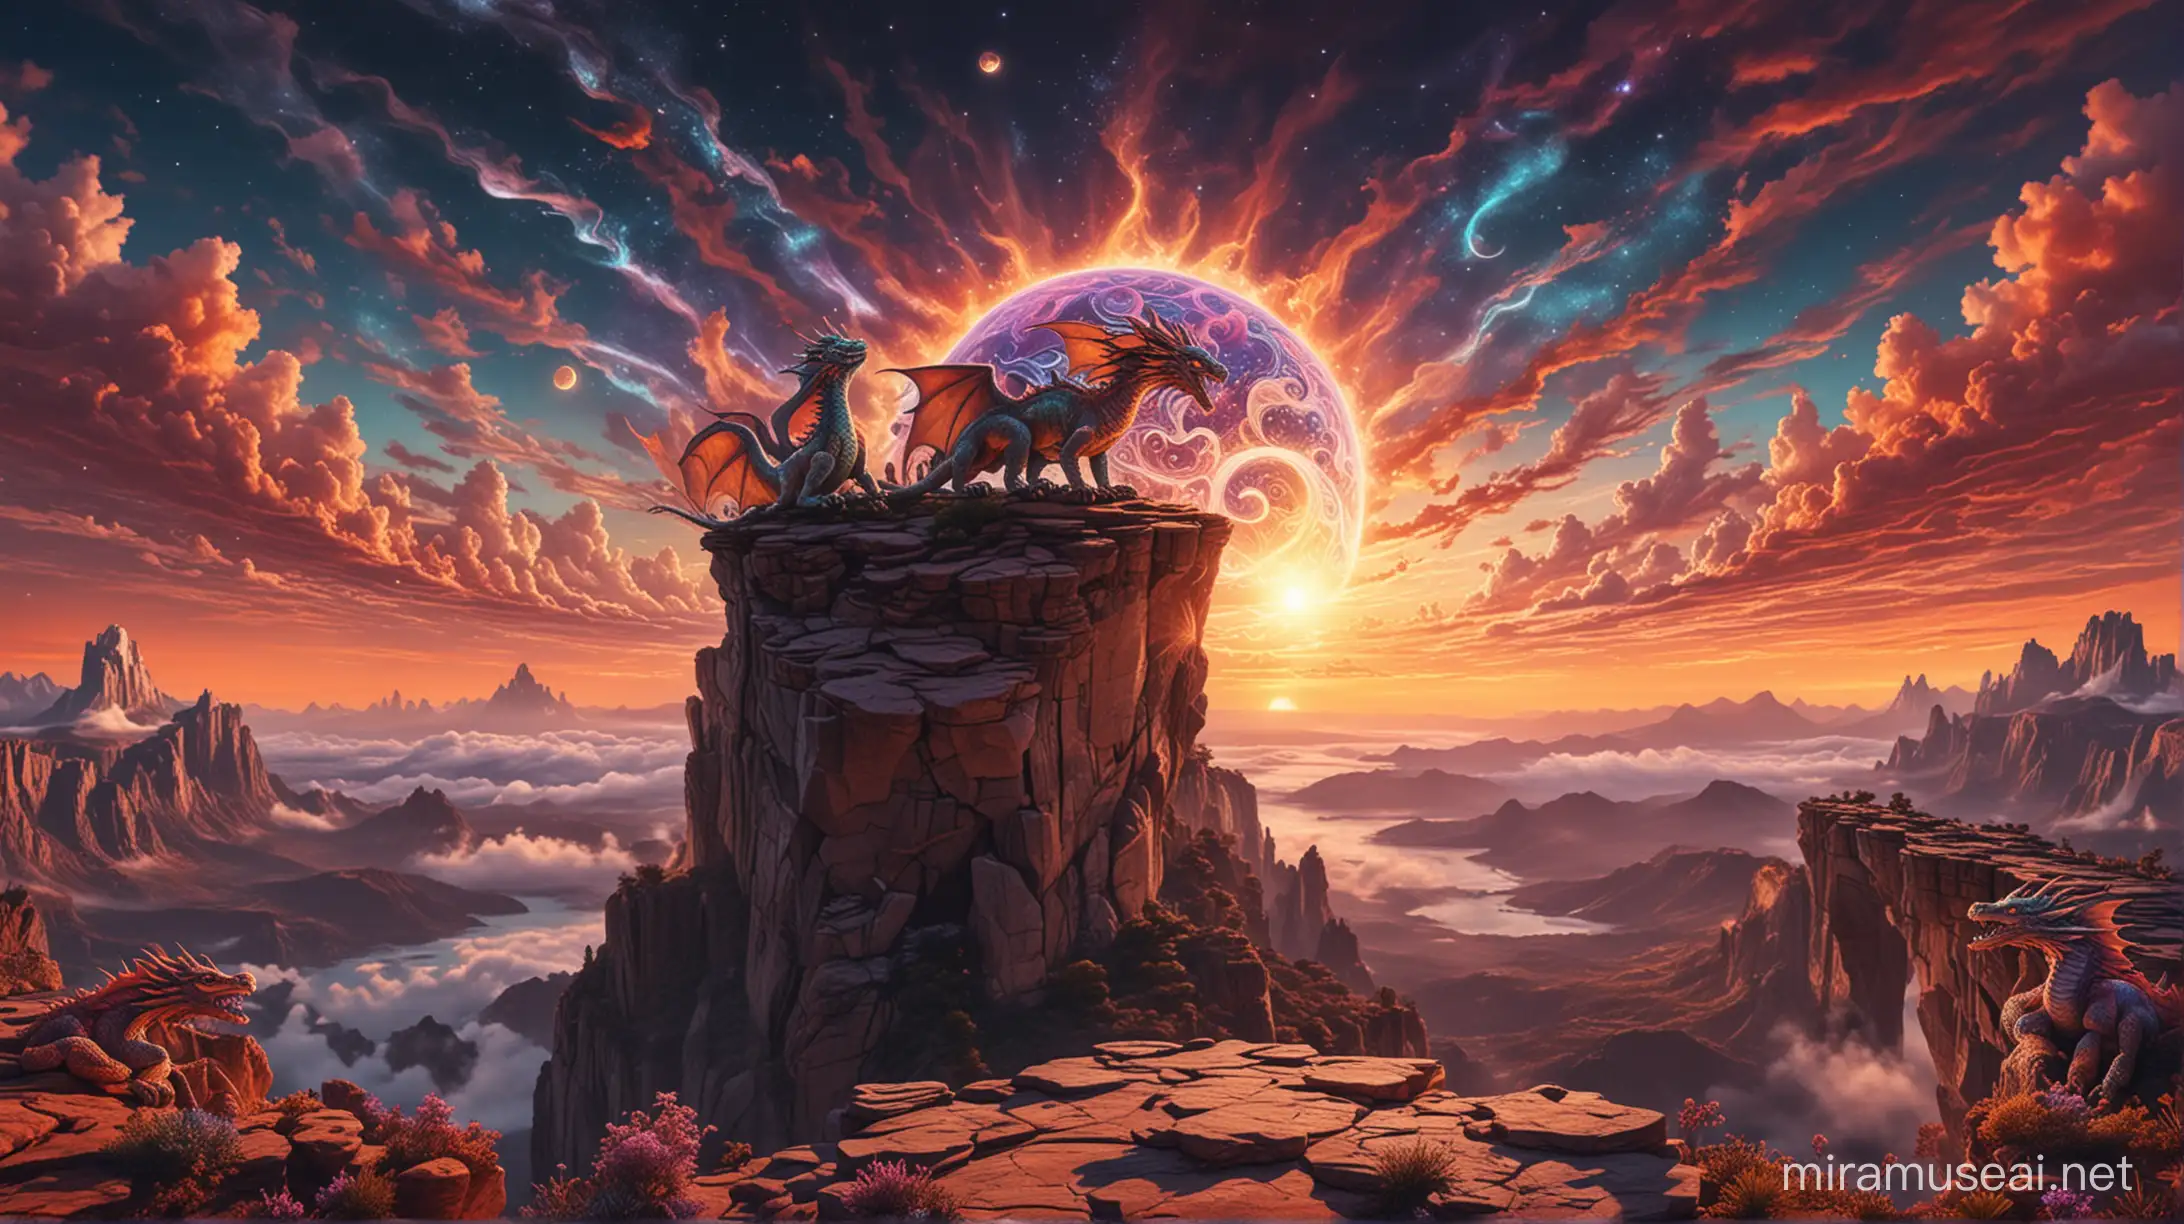 Psychedelic DMT visual on top of a scenic cliff at the edge of the universe at sunset with both the sun and moon visible. The clouds are shaped like dragons